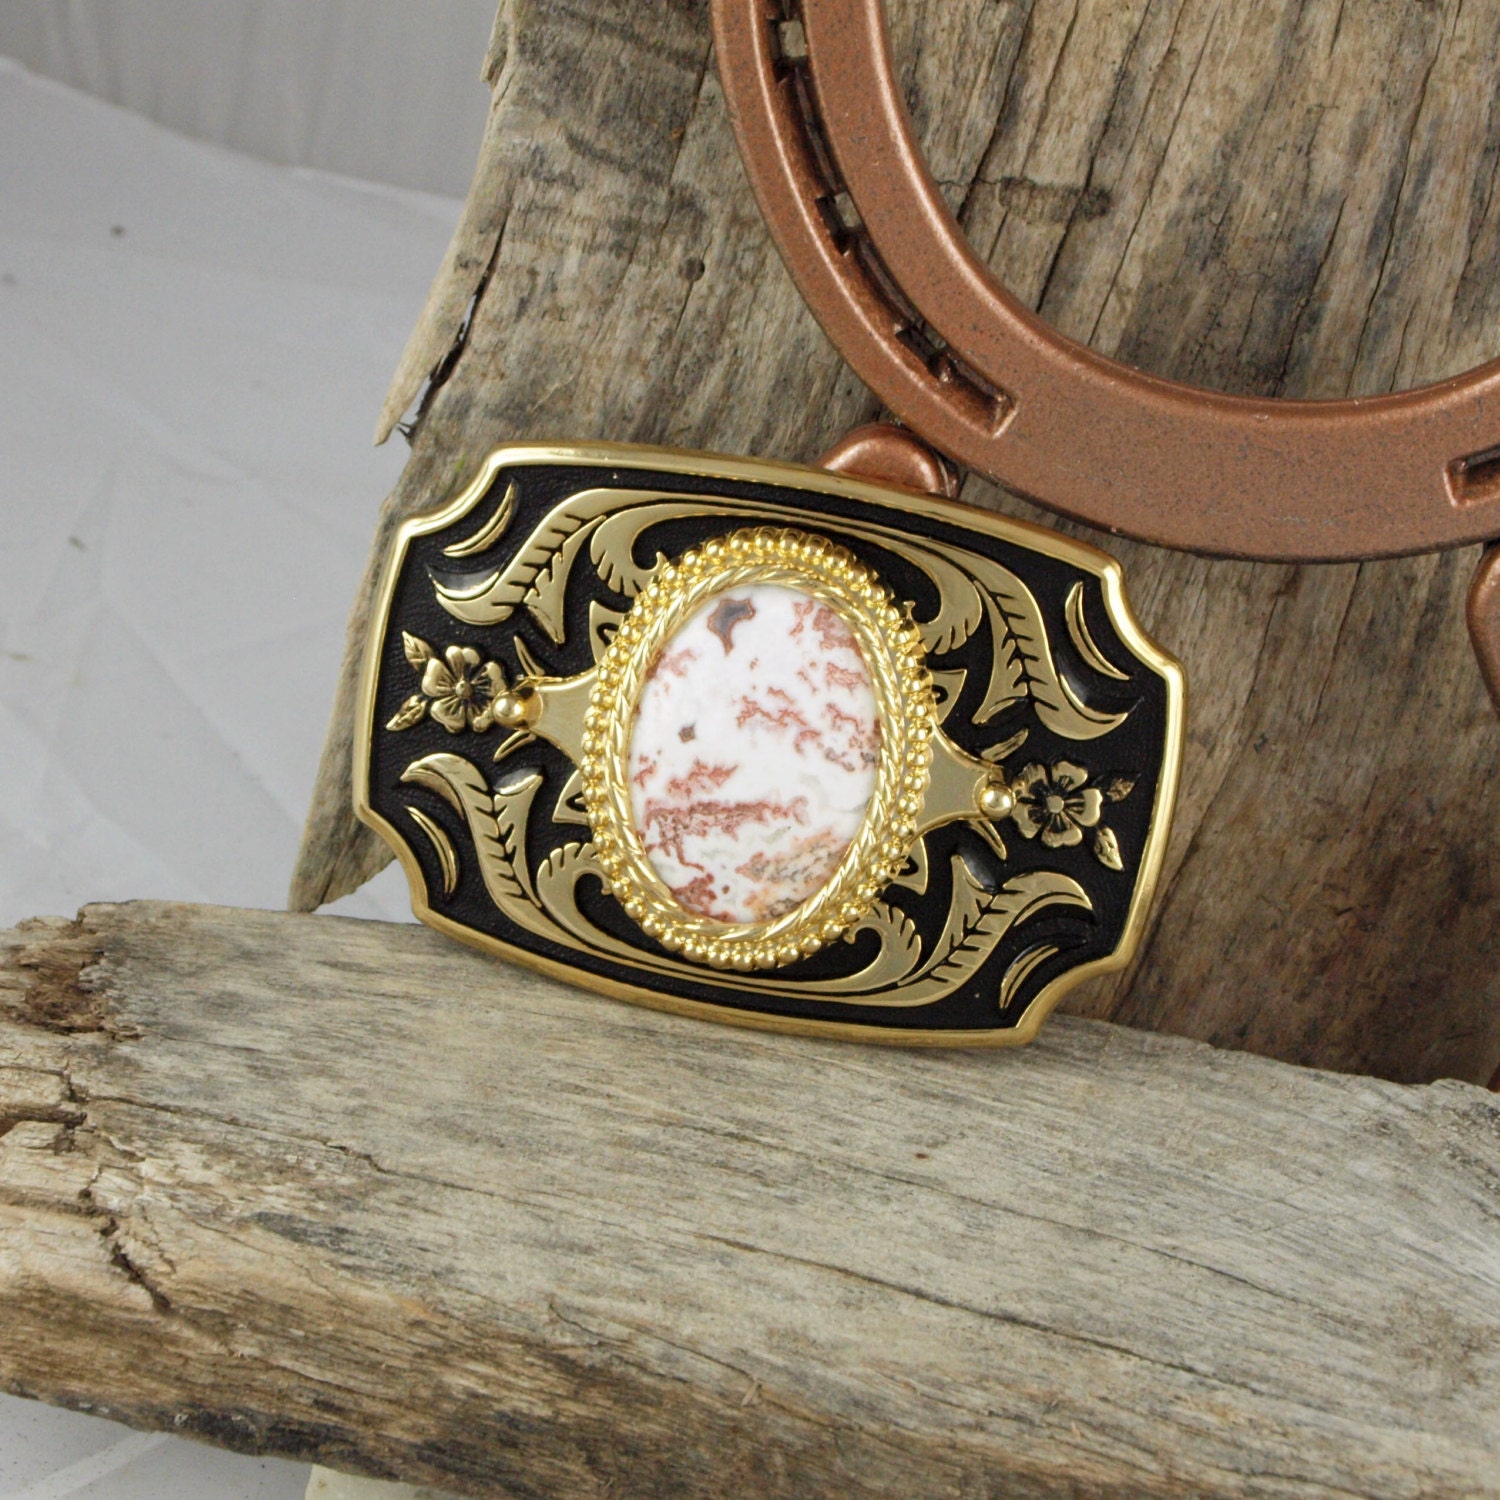 Western Belt Buckle -Natural Mexican Crazy Lace Agate Belt Buckle -Cowboy  Belt Buckle - Gold Tone & Black with Mexican Crazy Lace Agate